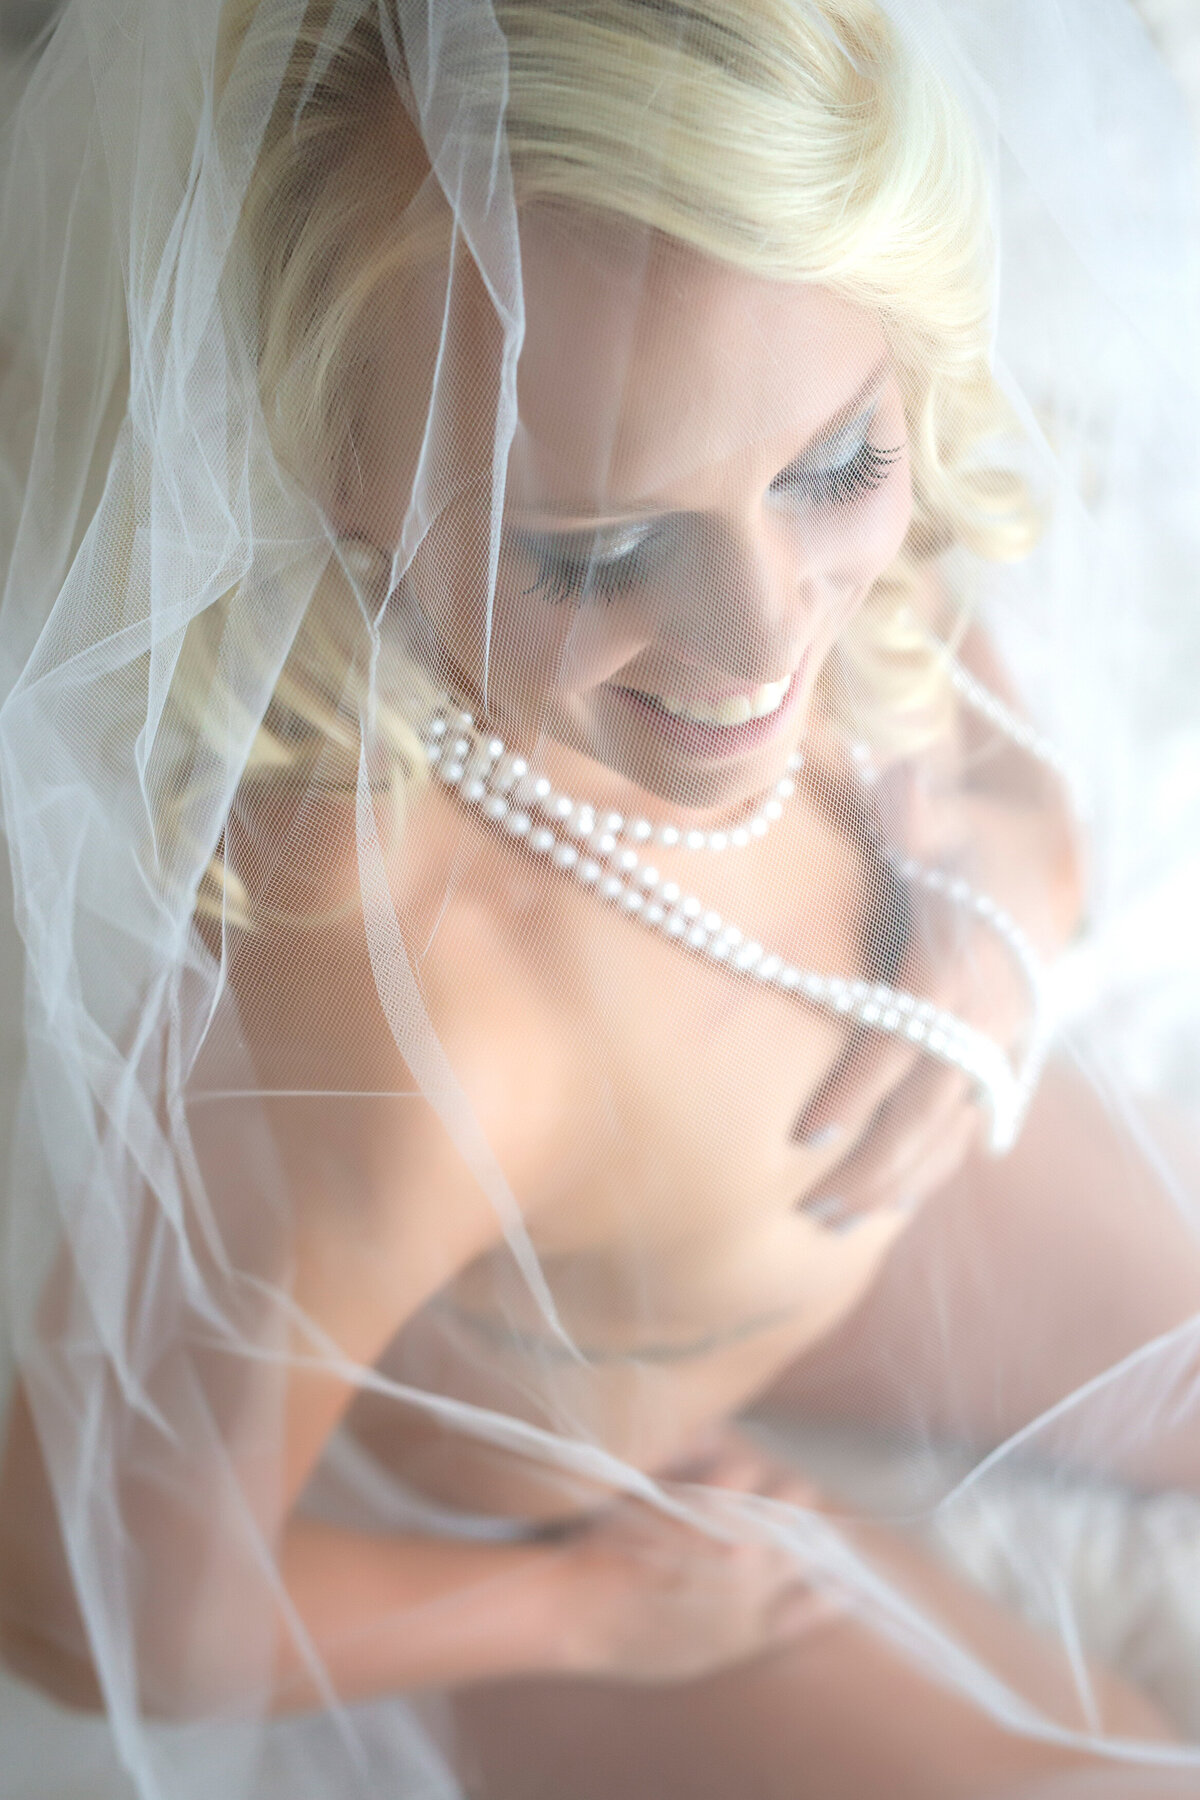 bride wearing a veil covering her and pearl necklace while smiling for her bridal boudoir session